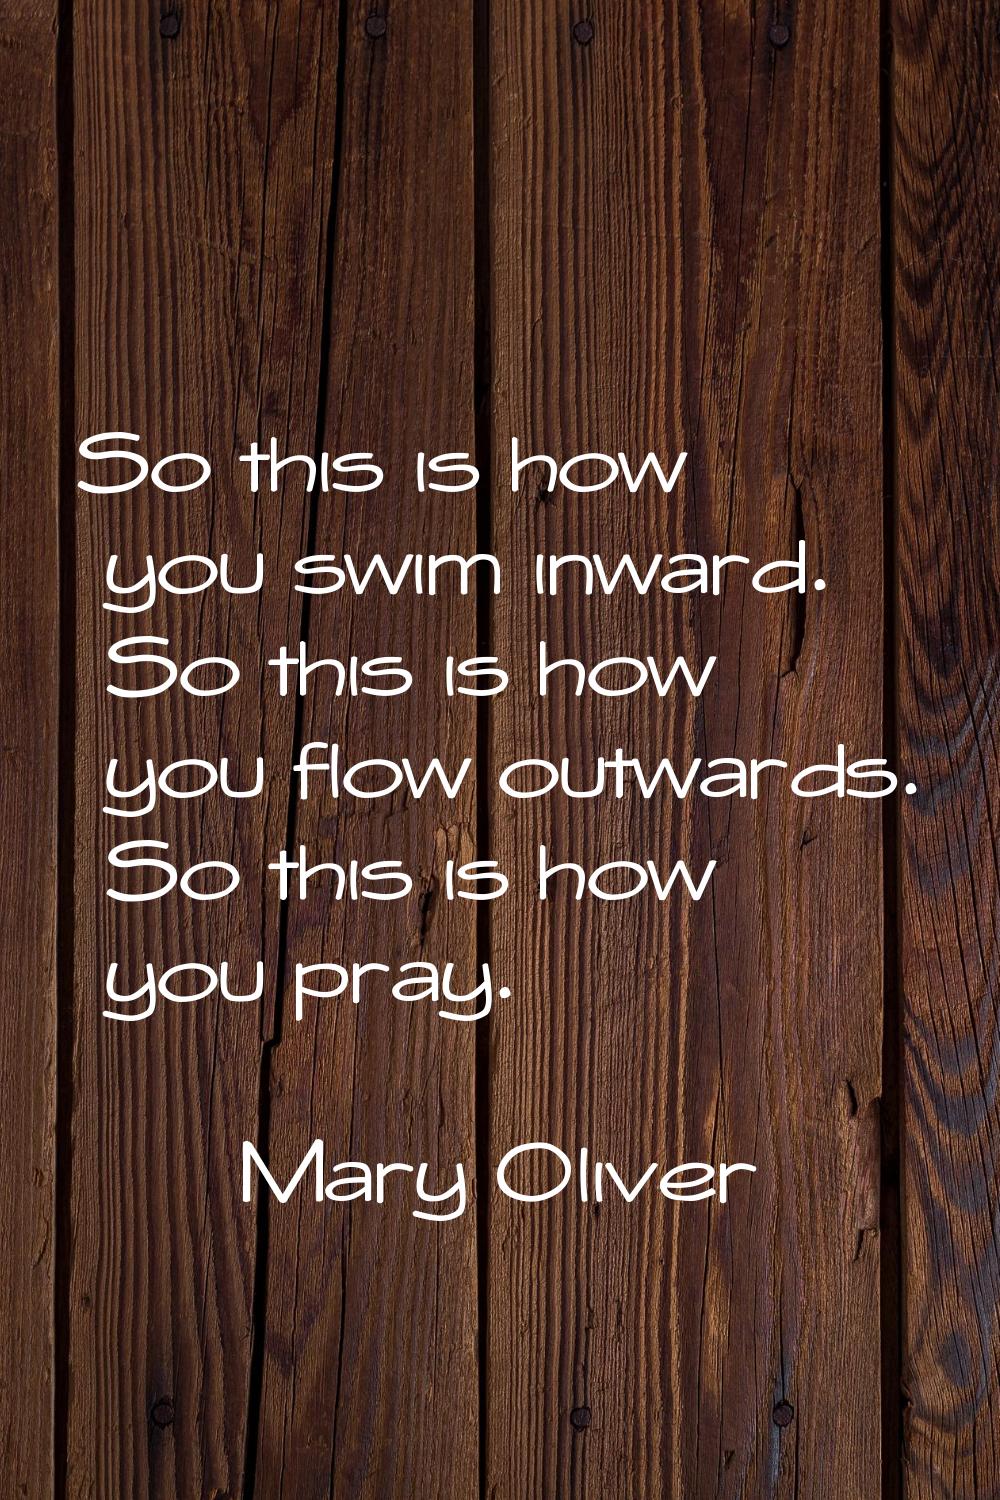 So this is how you swim inward. So this is how you flow outwards. So this is how you pray.